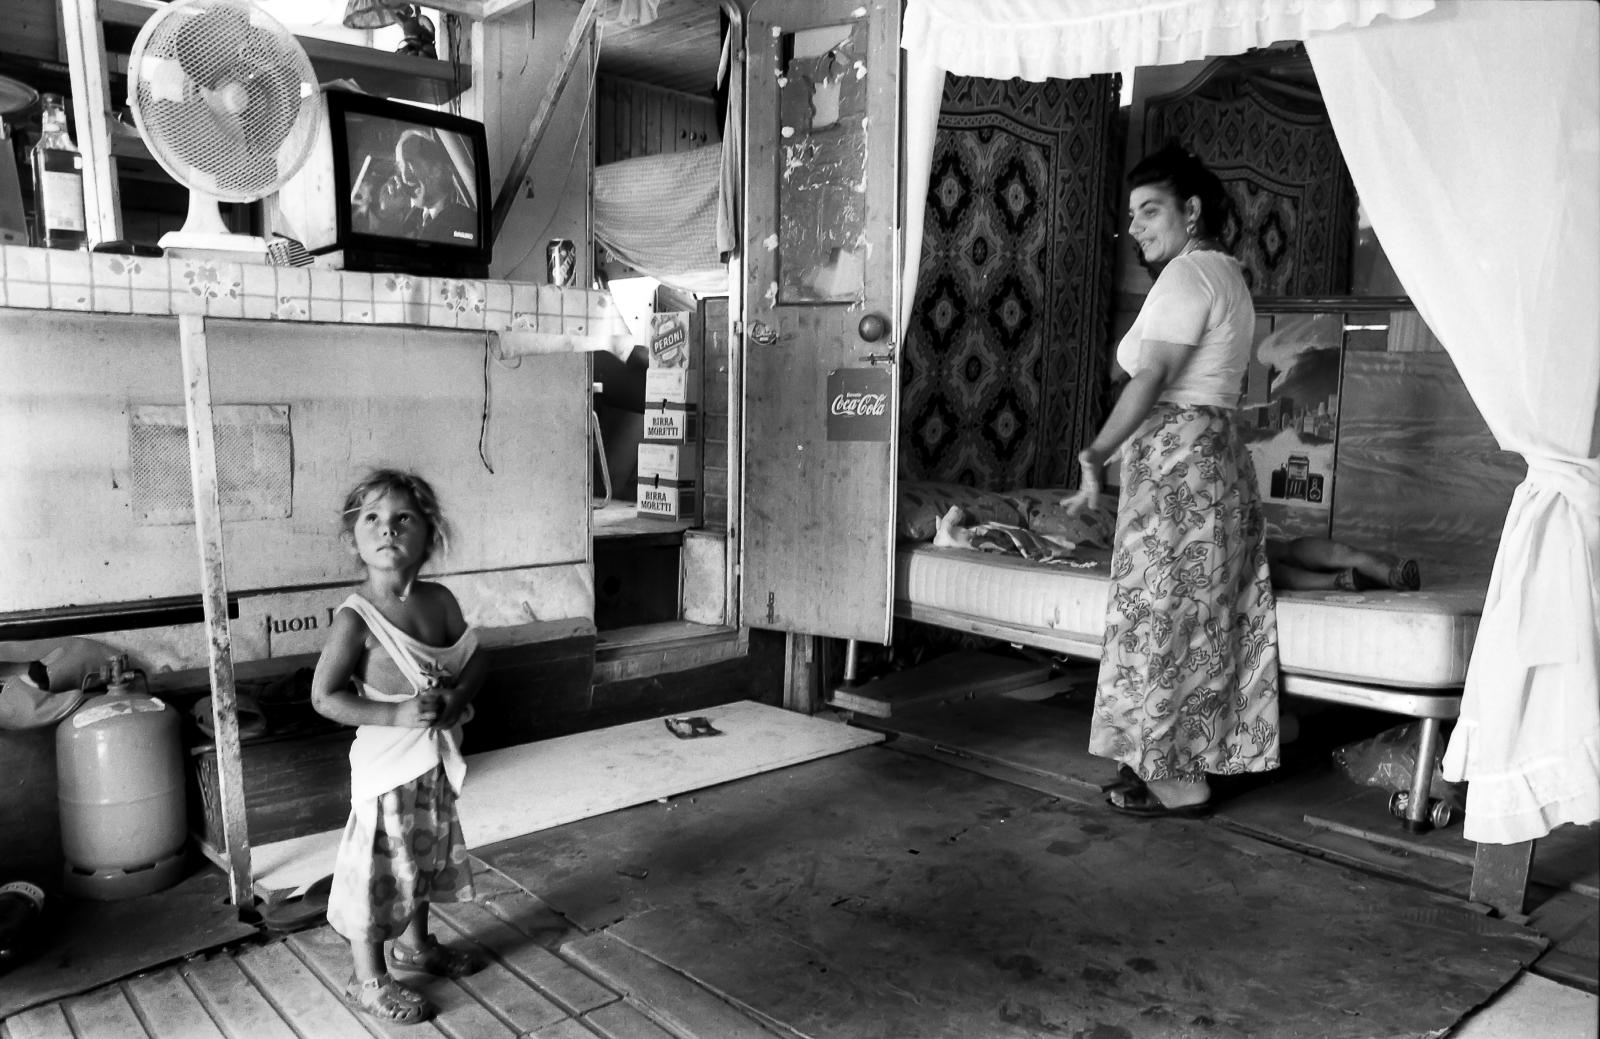 Mother talking to young daughter in gypsy camp in Rome, Italy.